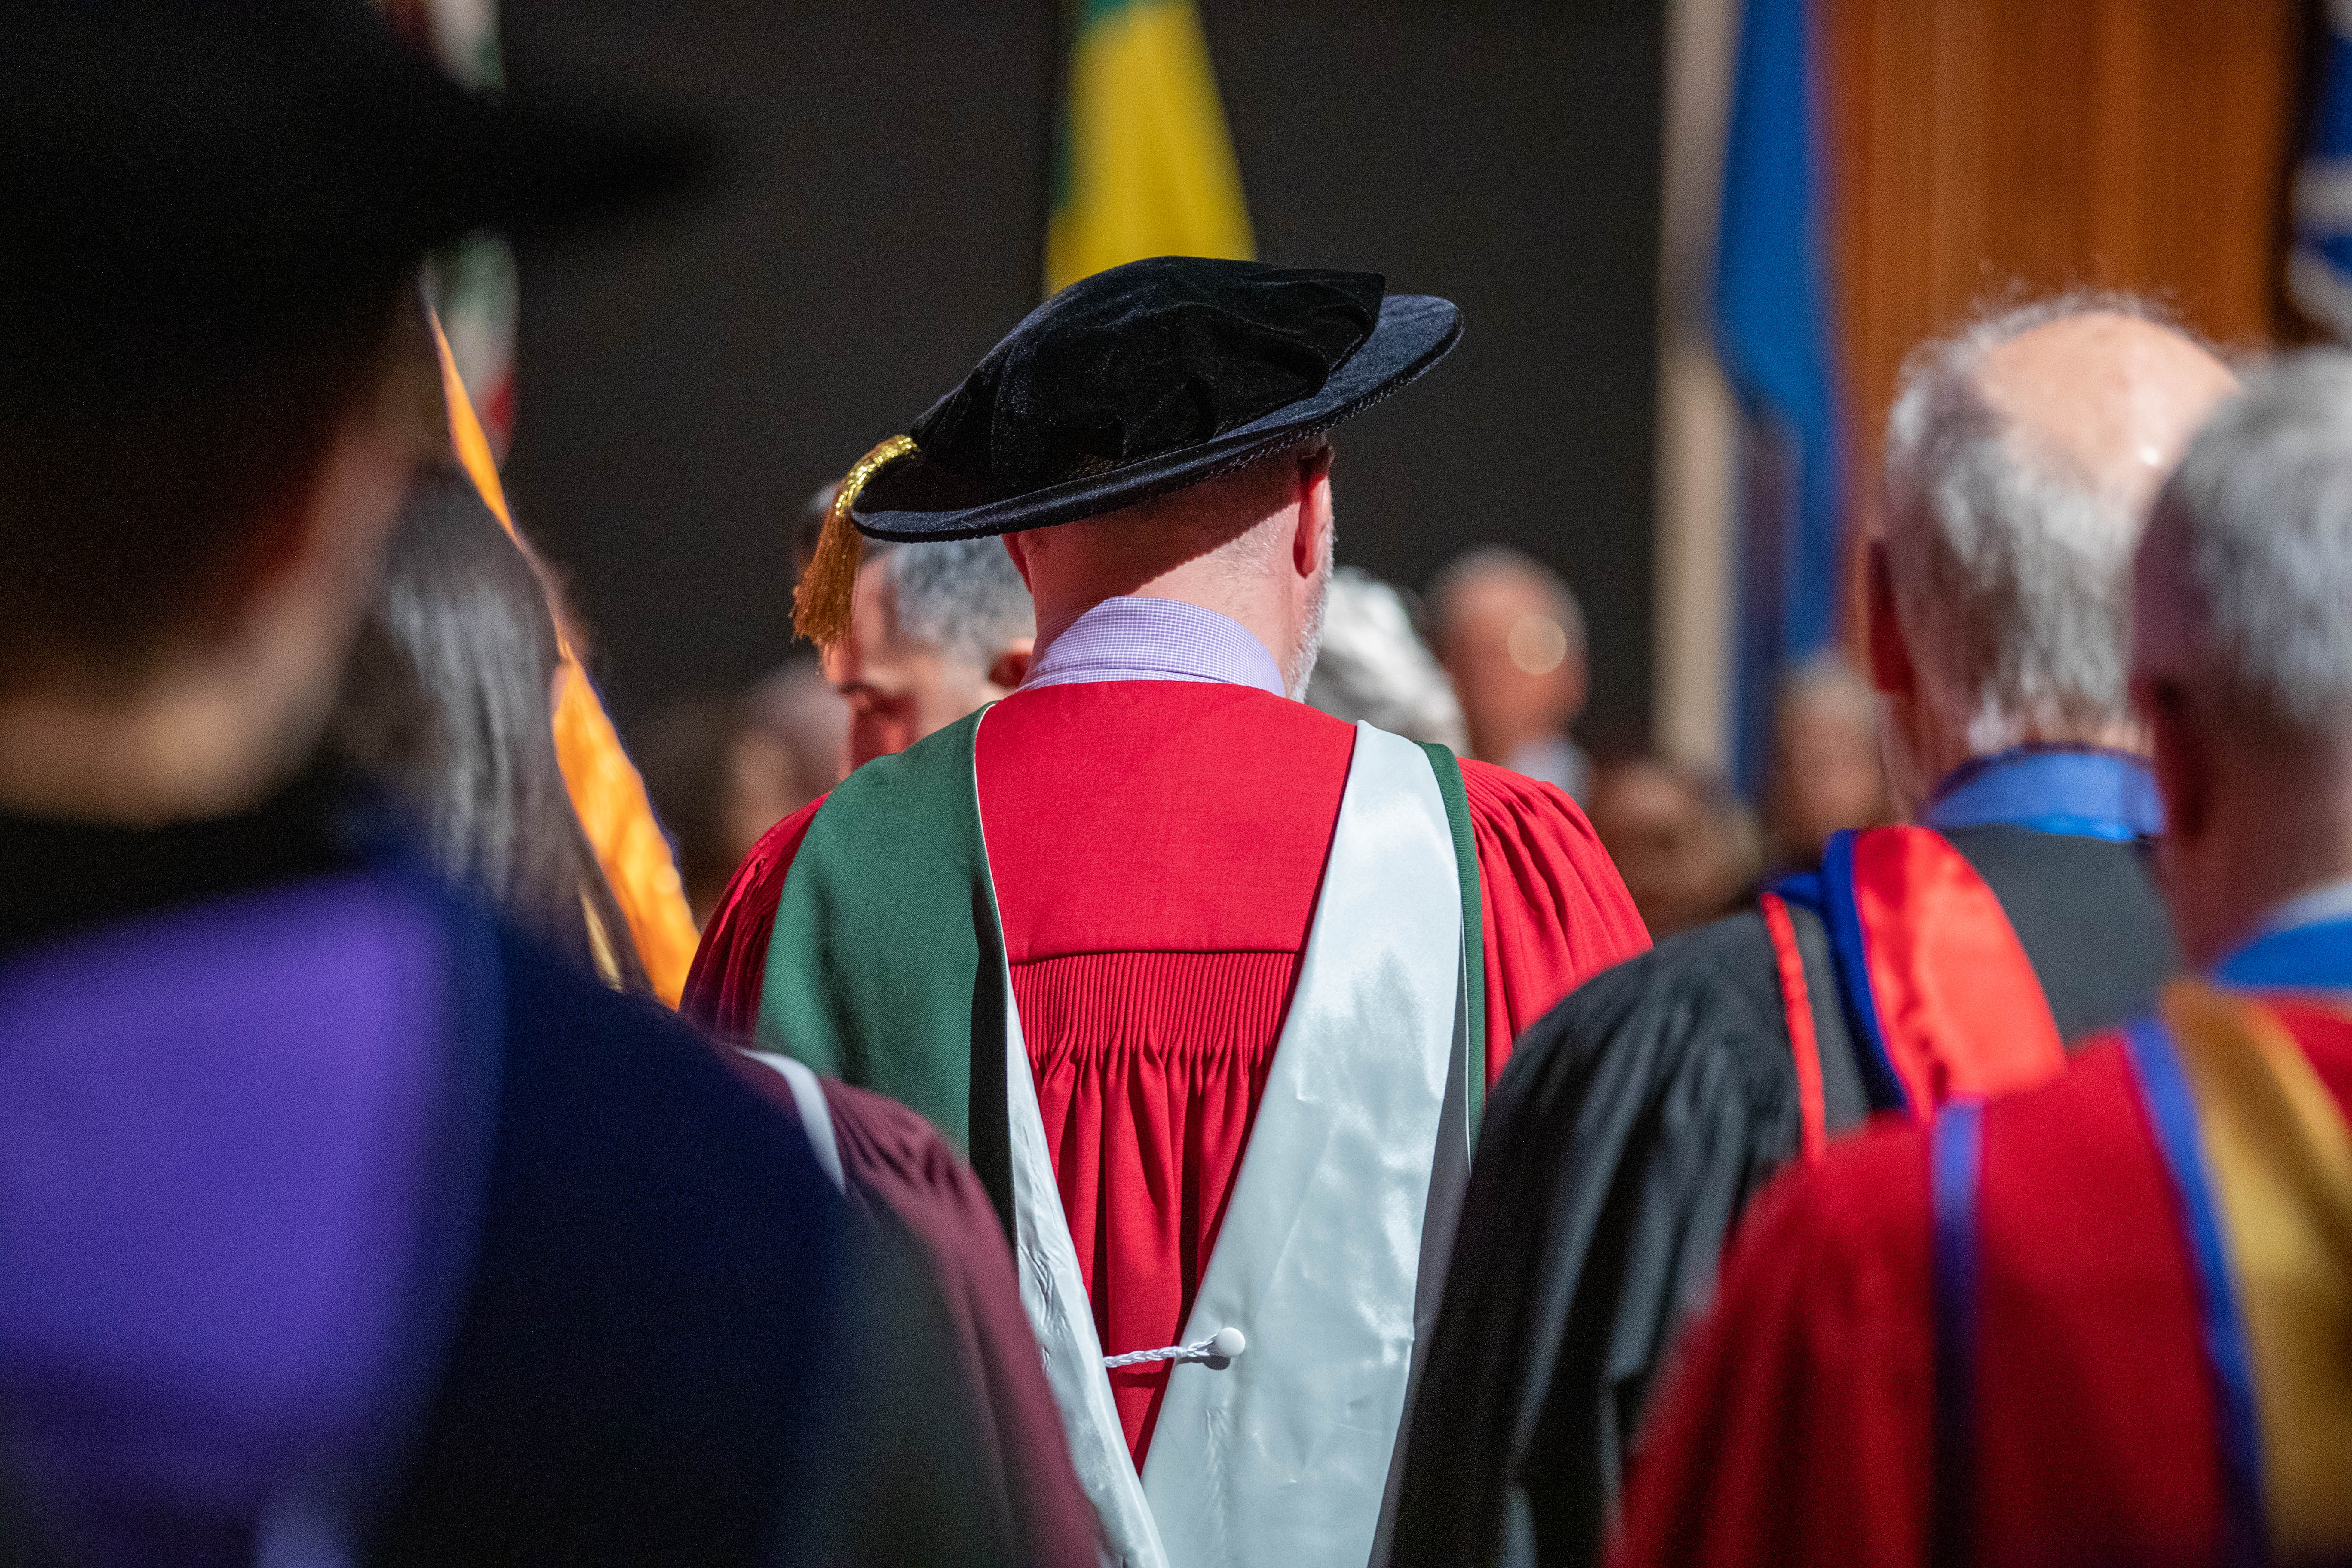 The backs of several people wearing colourful convocation gowns